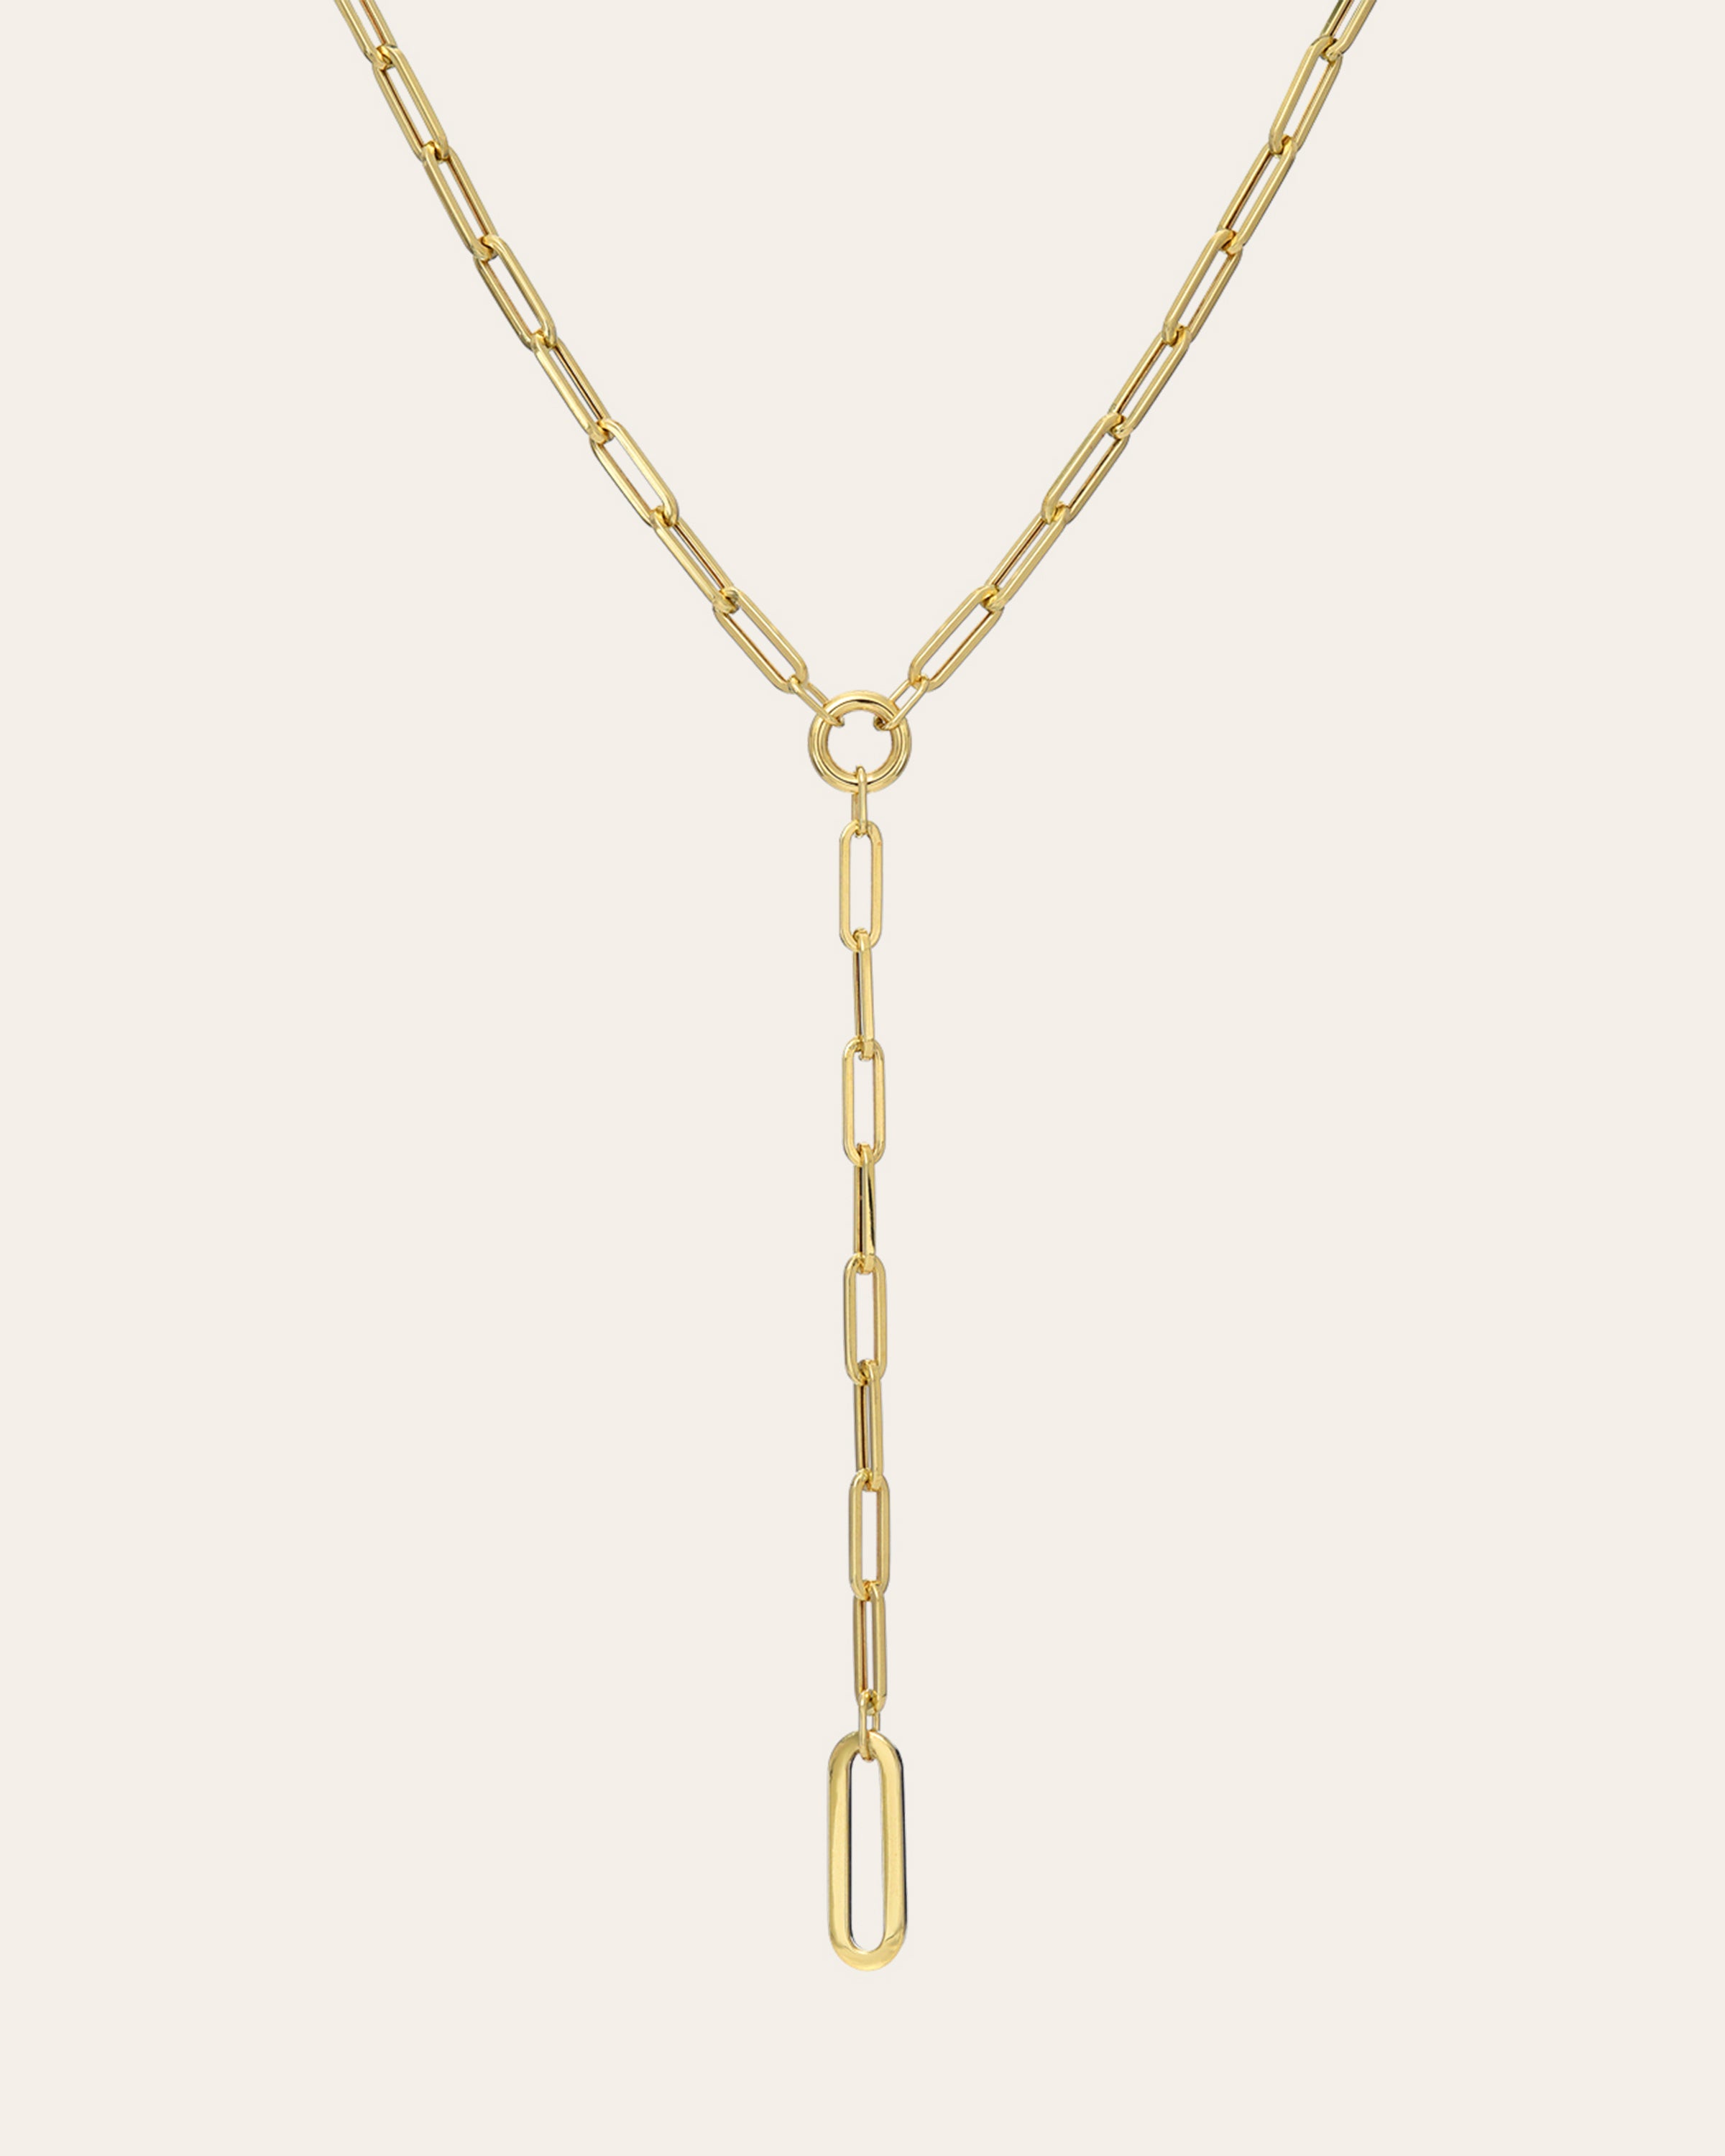 Zoë Chicco 14K Gold Large Mantra Adjustable Paperclip Chain Lariat Necklace 14K Yellow Gold / The Best Thing to Hold Onto in Life Is Each Other / Star